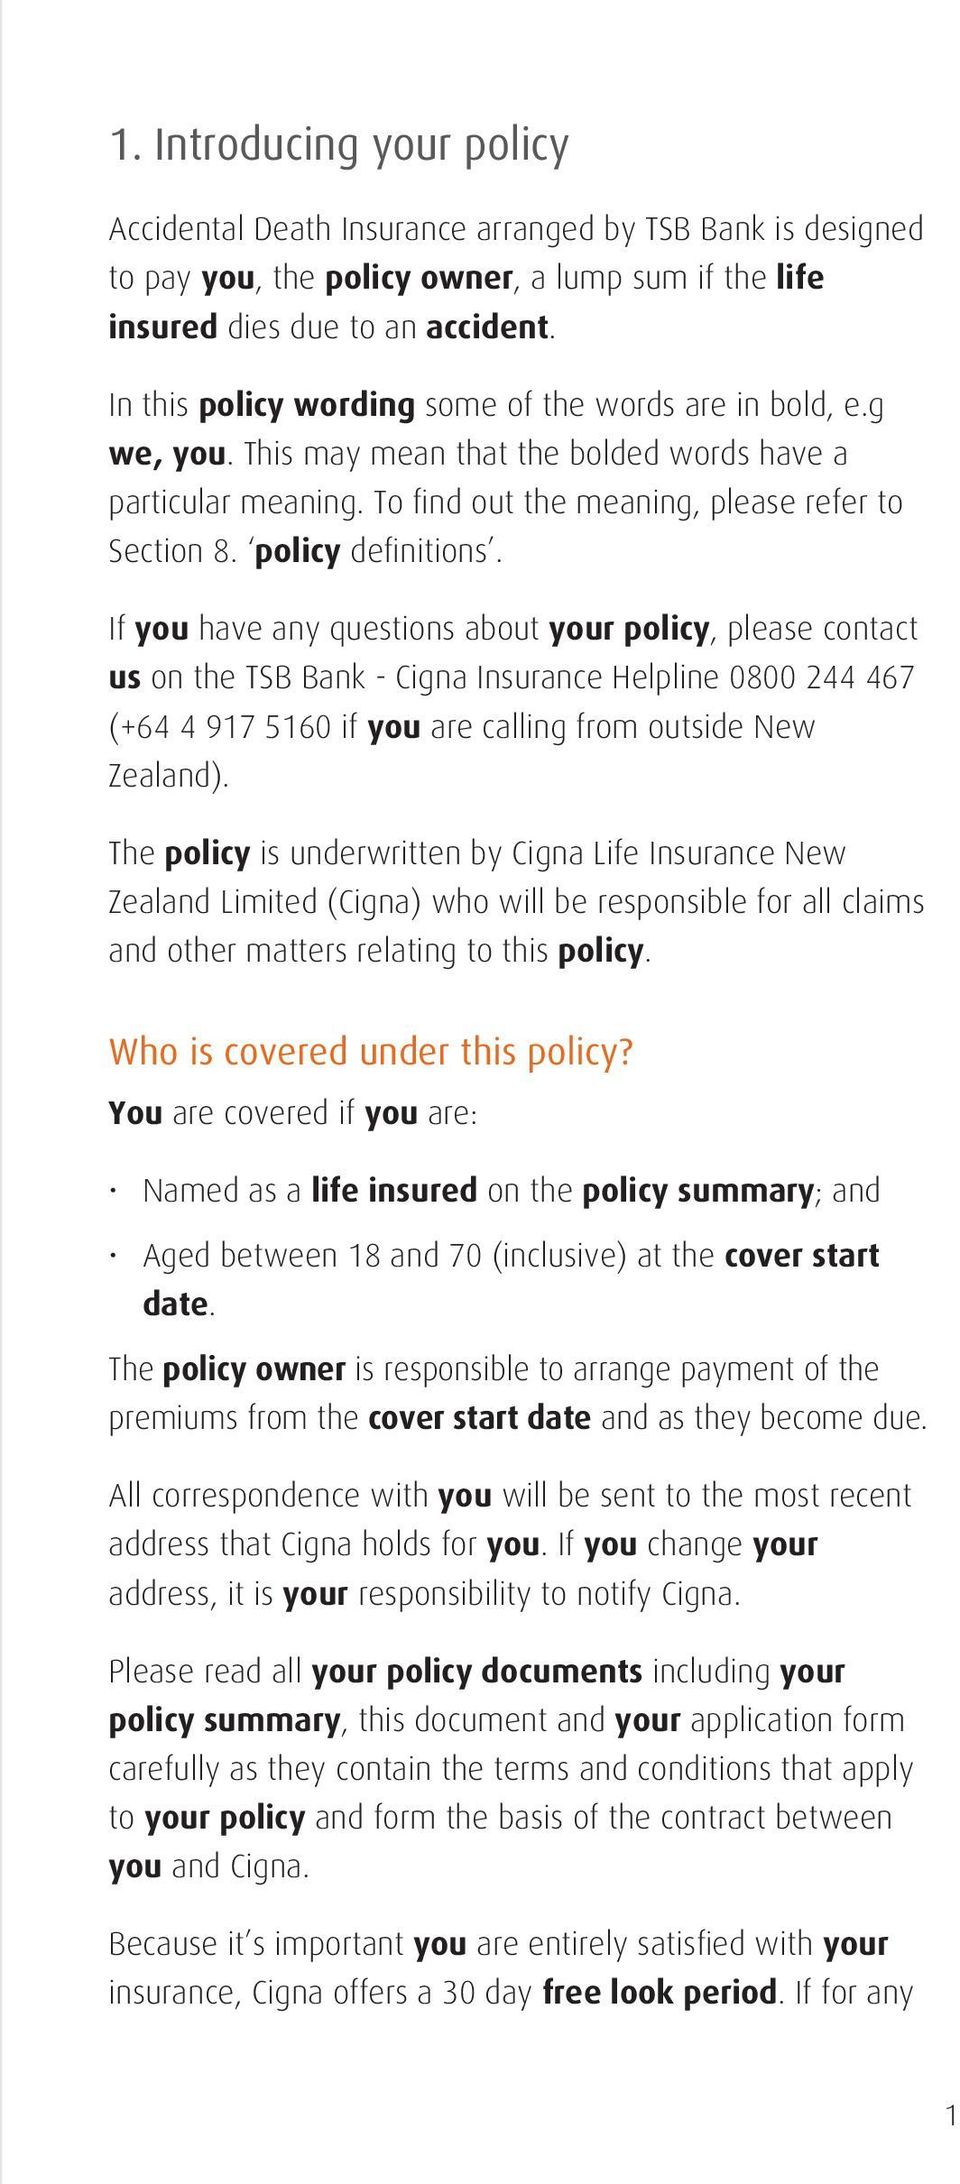 policy definitions. If you have any questions about your policy, please contact us on the TSB Bank - Cigna Insurance Helpline 0800 244 467 (+64 4 917 5160 if you are calling from outside New Zealand).